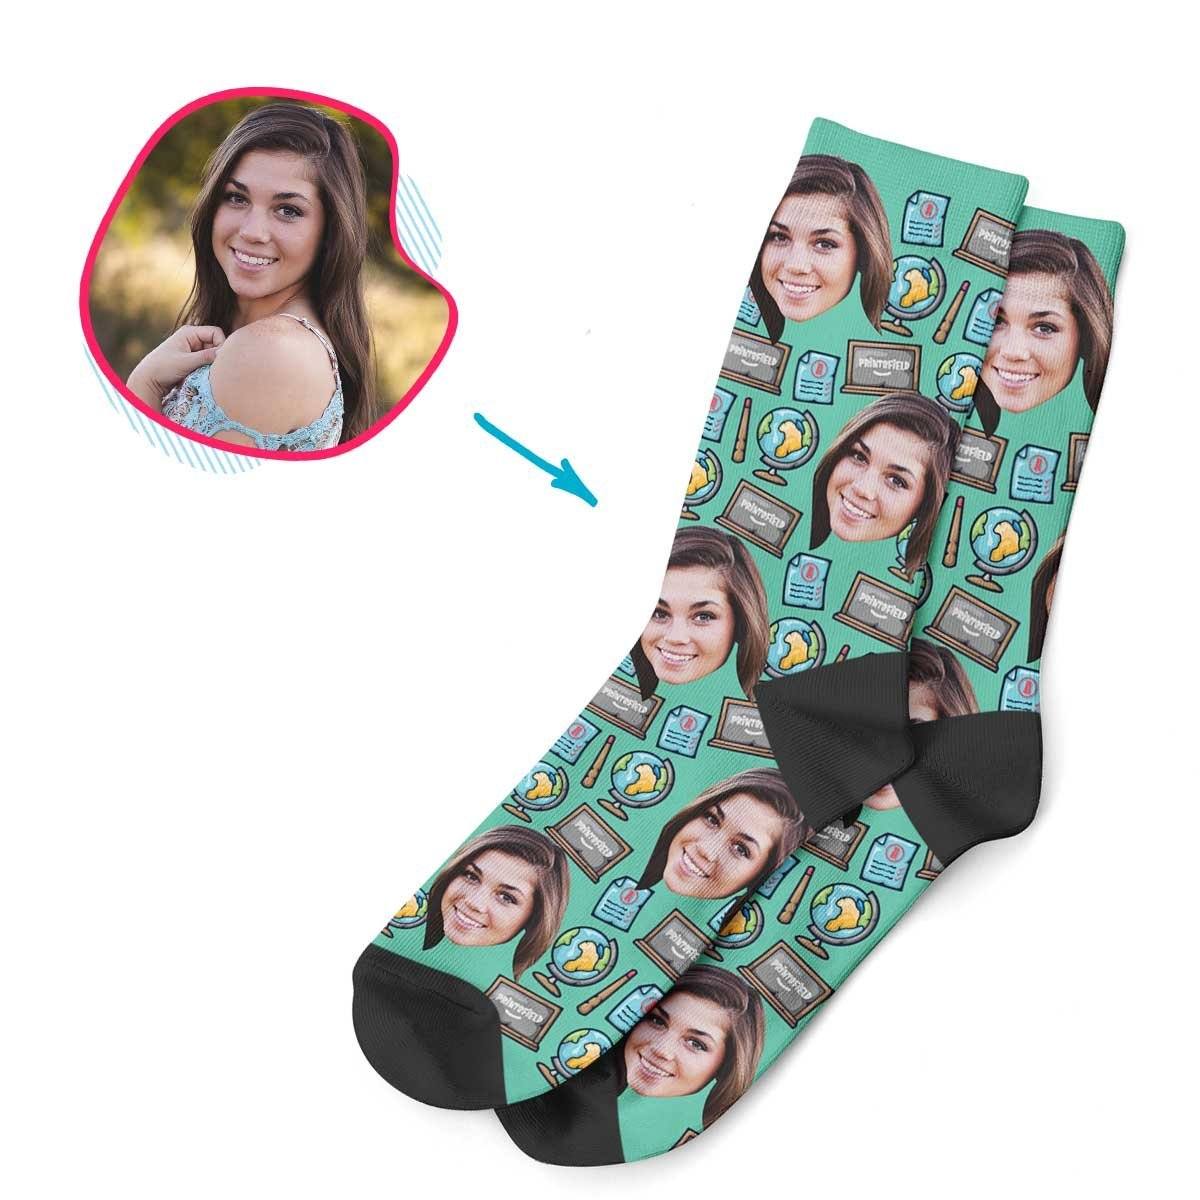 Mint Teacher personalized socks with photo of face printed on them